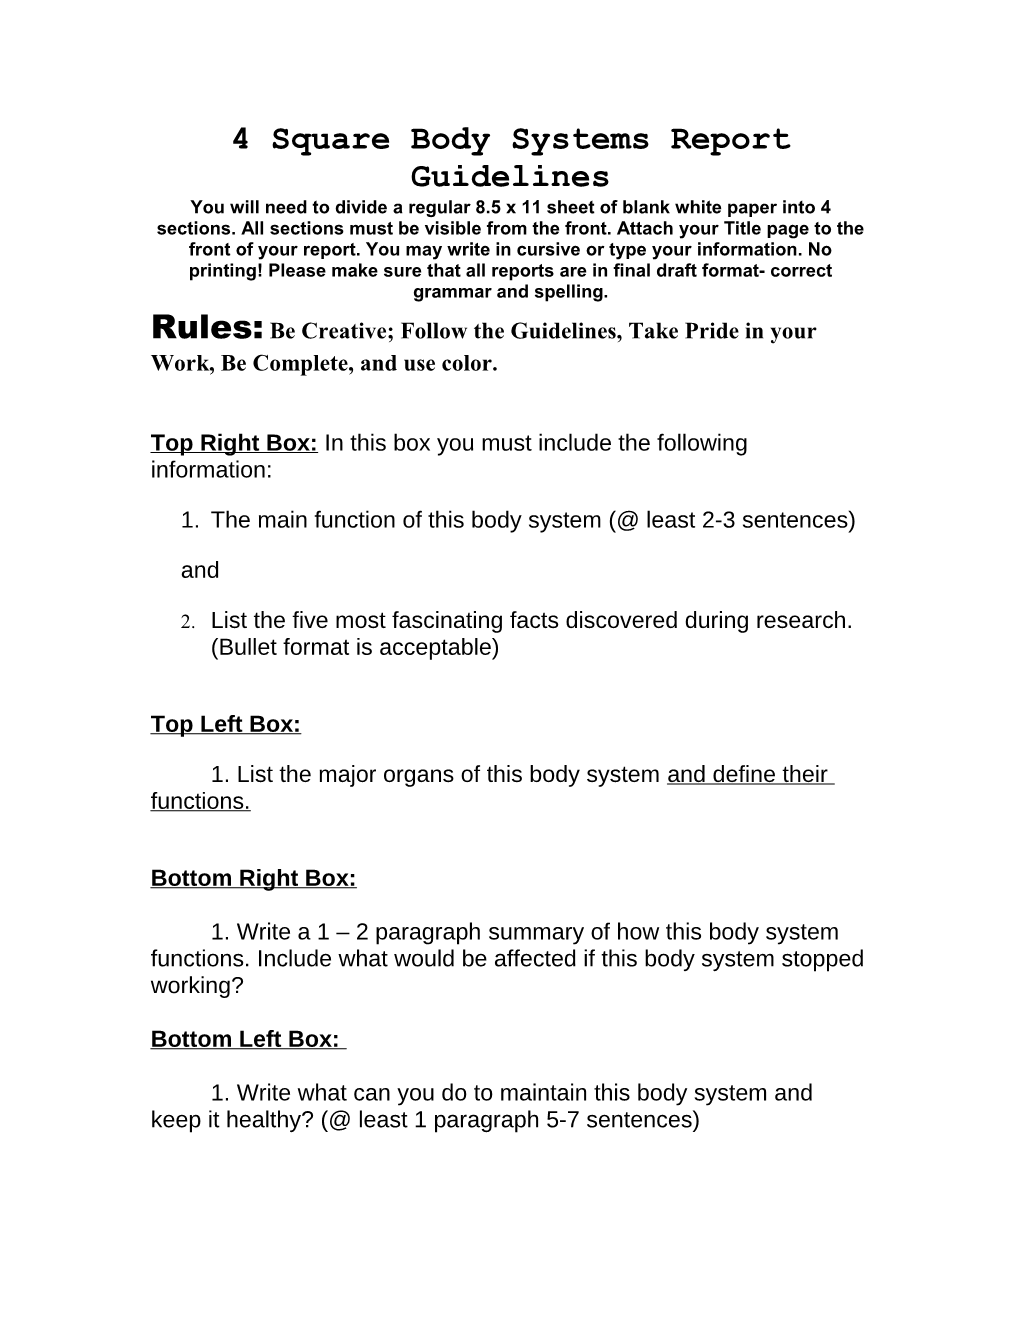 4 Square Book Report Guidelines